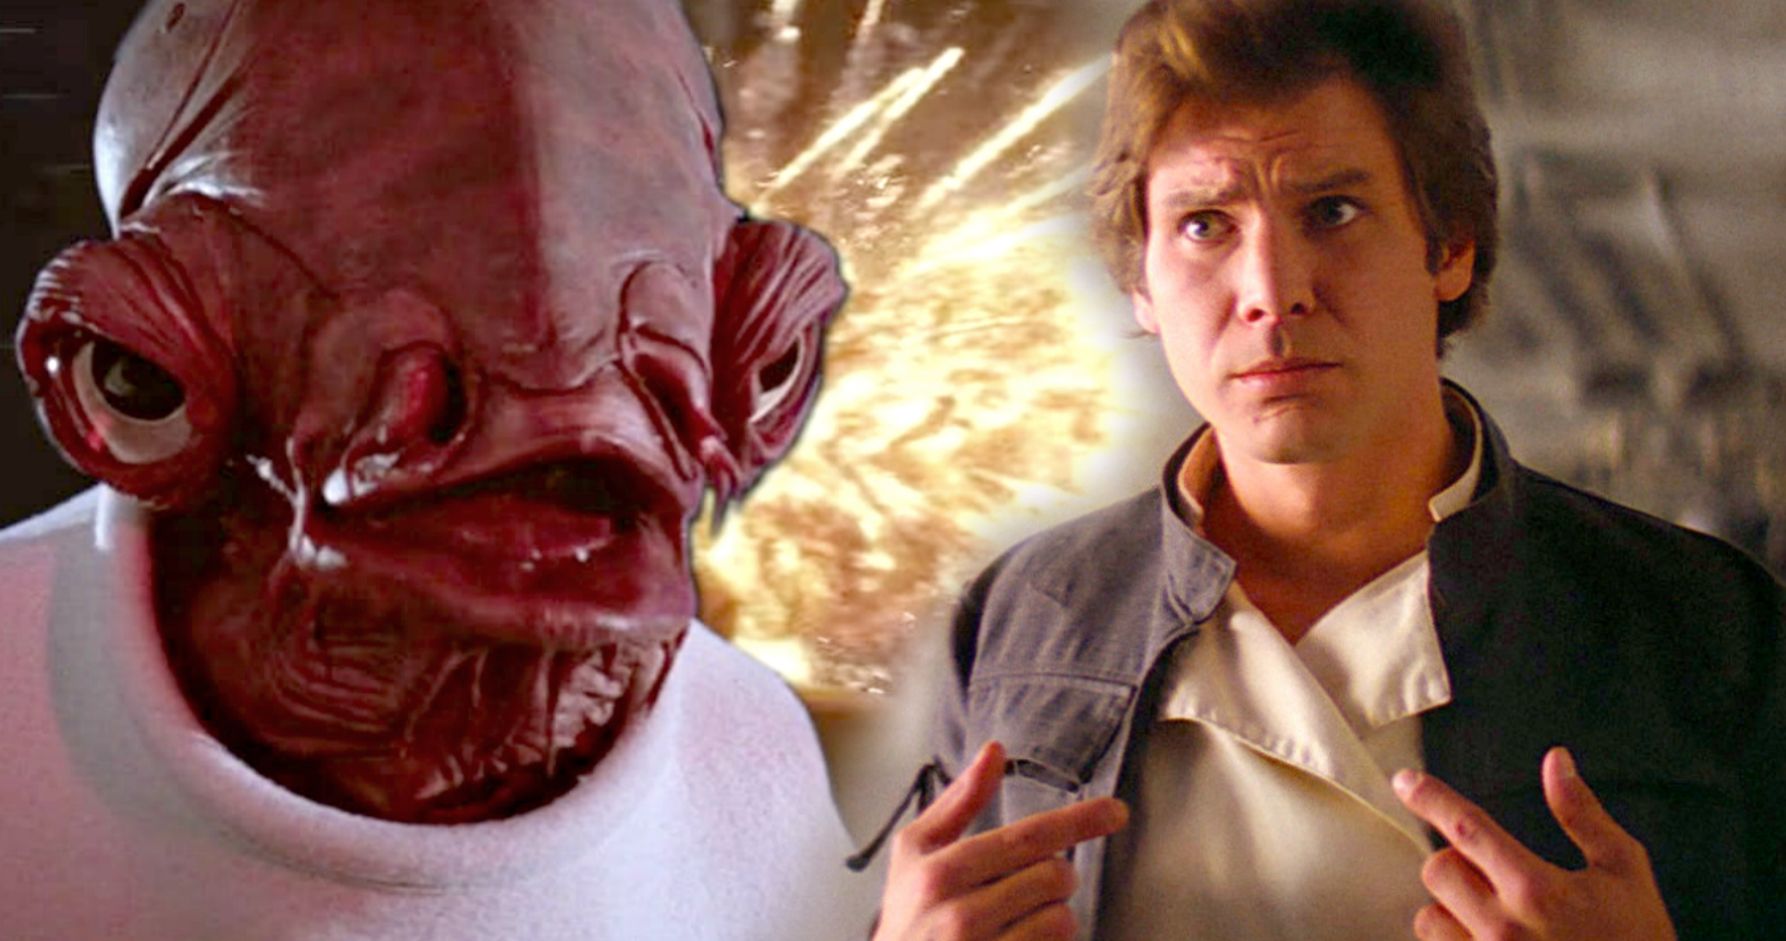 Admiral Ackbar Actor Claims Harrison Ford Wanted Him Fired from Return of the Jedi